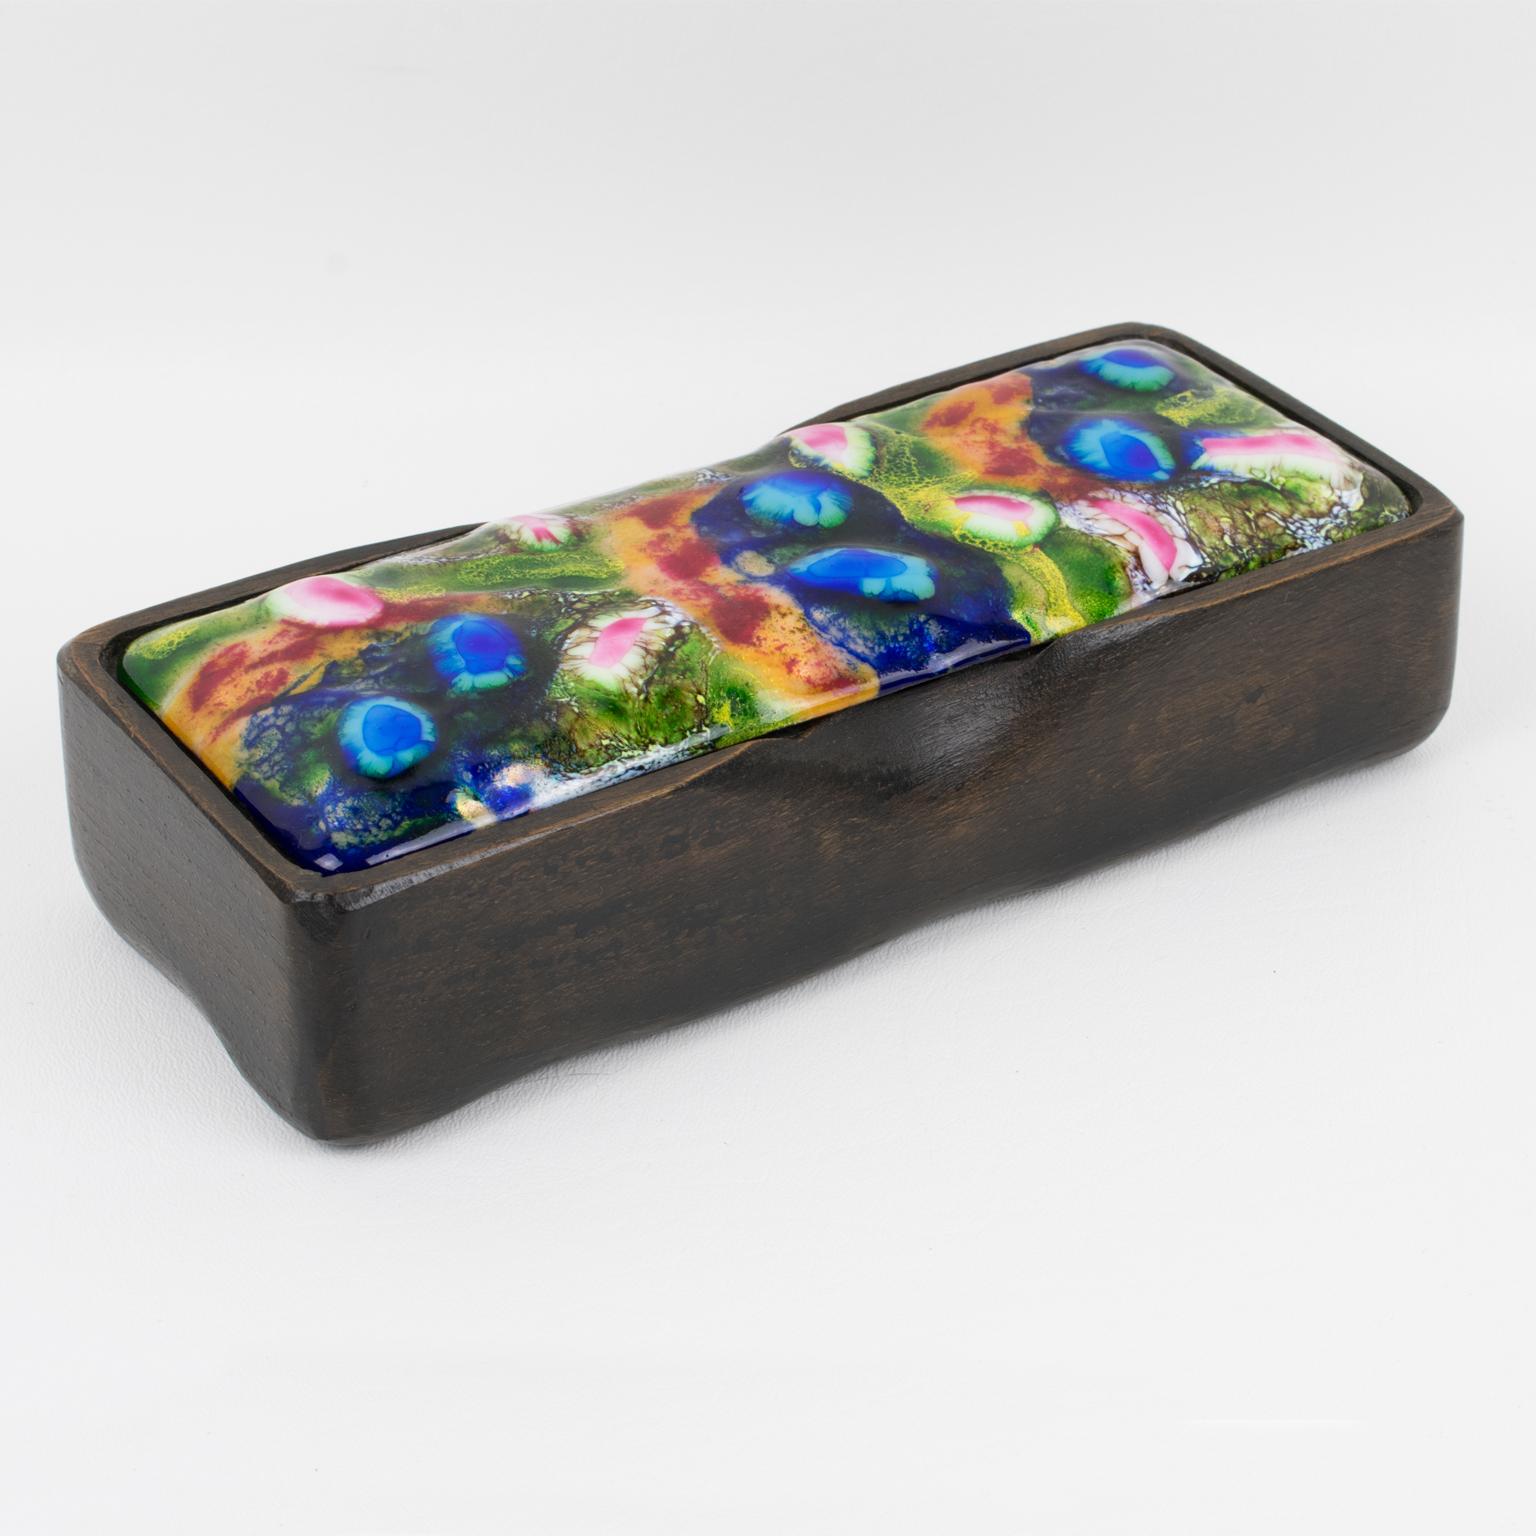 This beautiful Spanish Mid-Century-Modern decorative lidded box was hand-crafted by J. Capo Esmaltes in the 1960s. The rectangular shape boasts a carved wood container base with a lovely organic flair. The enamel-on-copper lid has a stunning